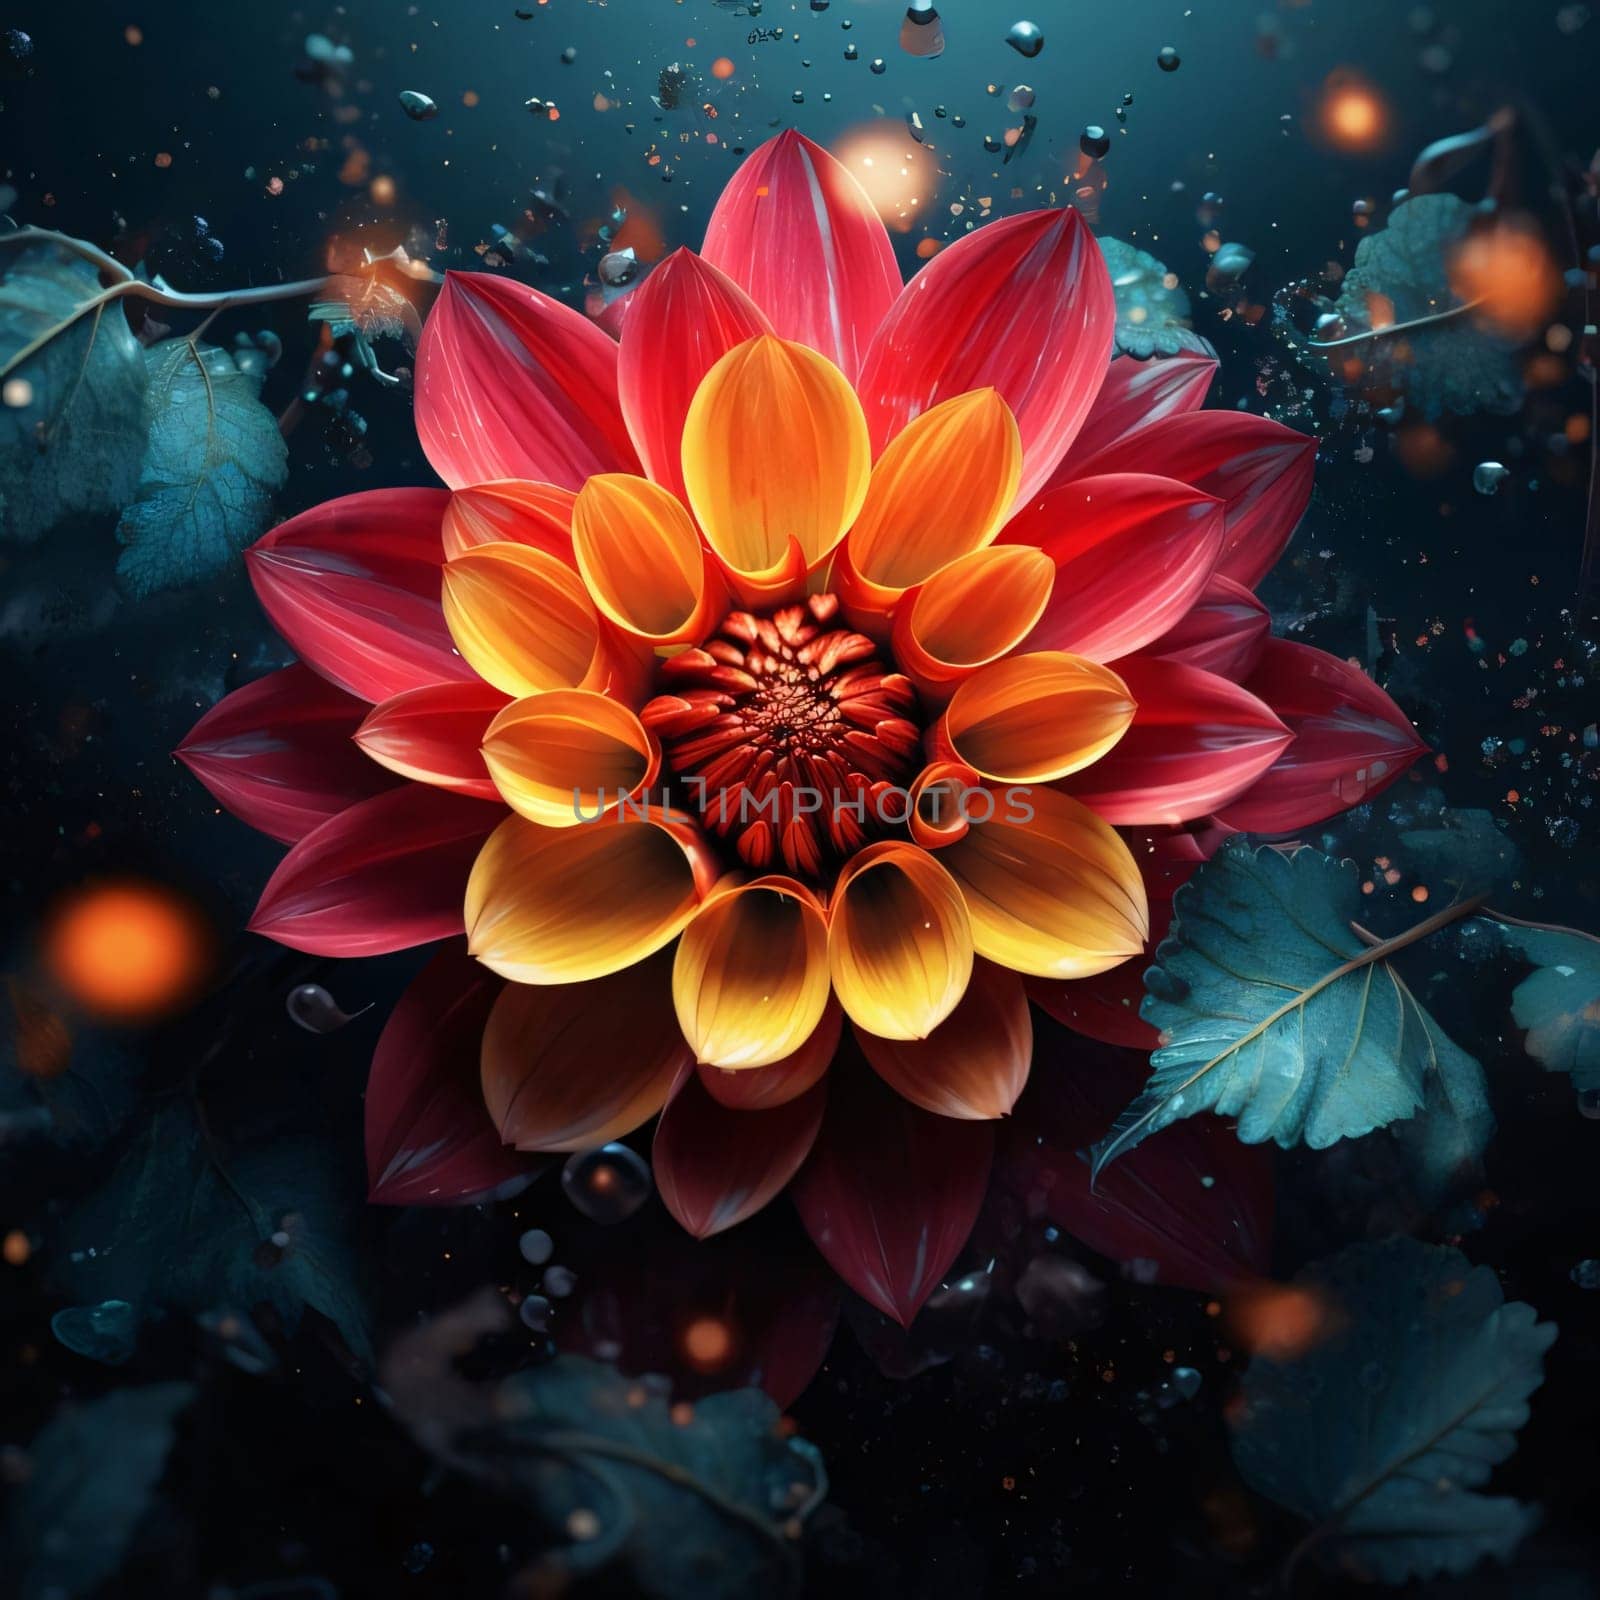 Orange red flower on a dark background with leaves. Flowering flowers, a symbol of spring, new life. A joyful time of nature waking up to life.